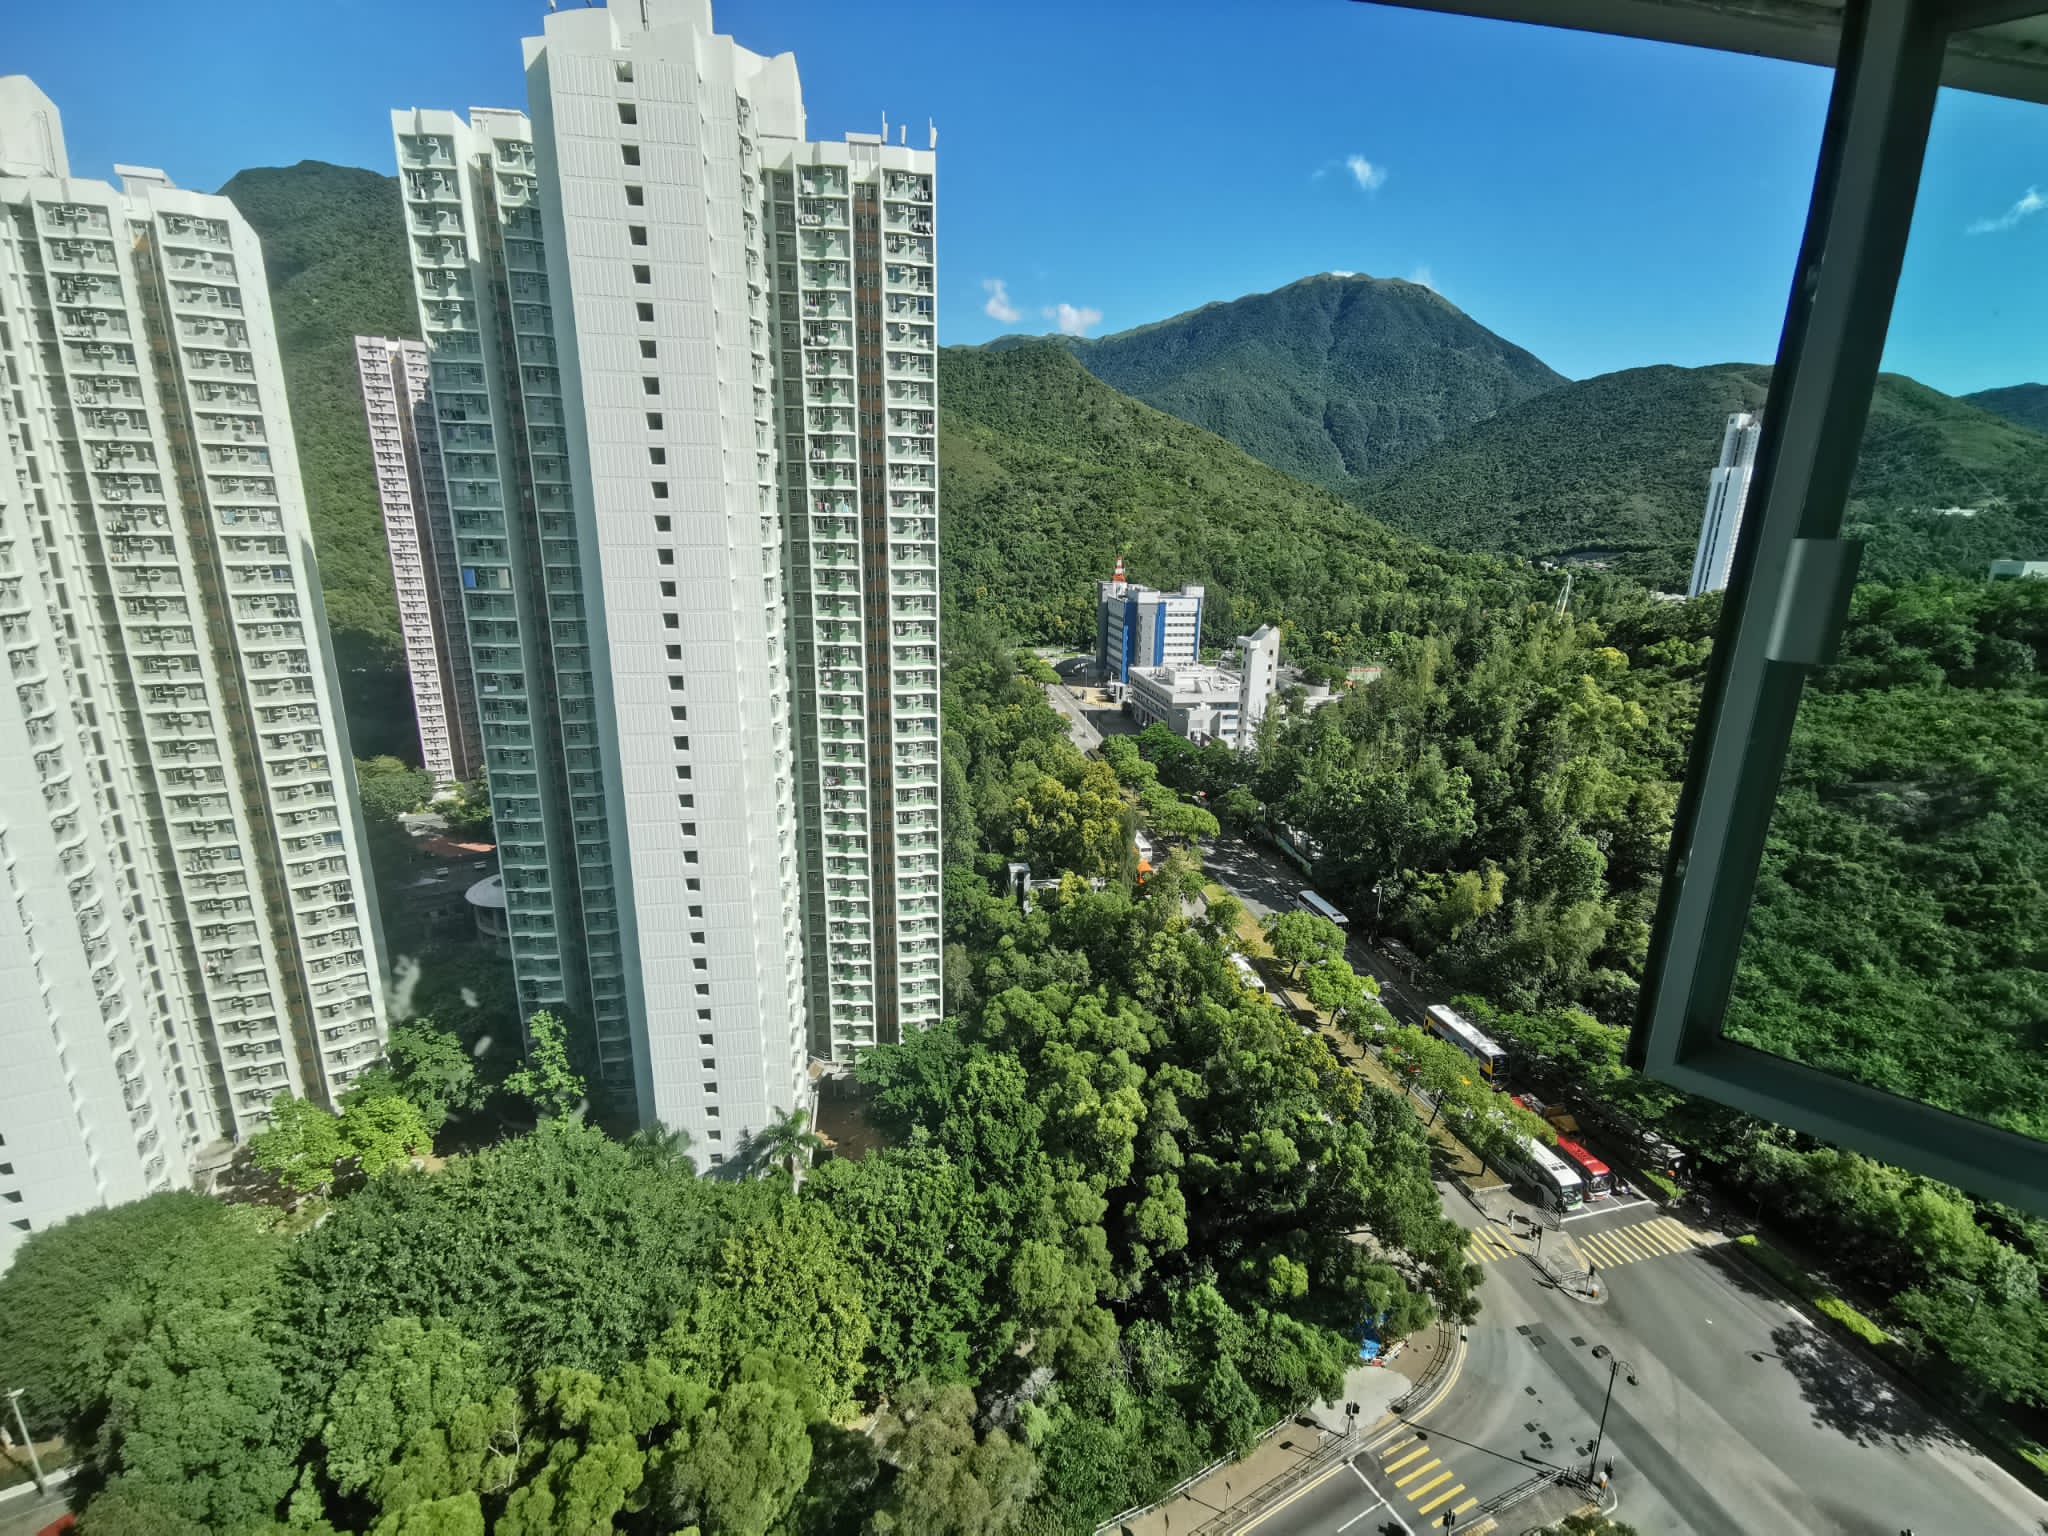 The real estate is close to shopping malls and the MTR four are beautiful and green mountains